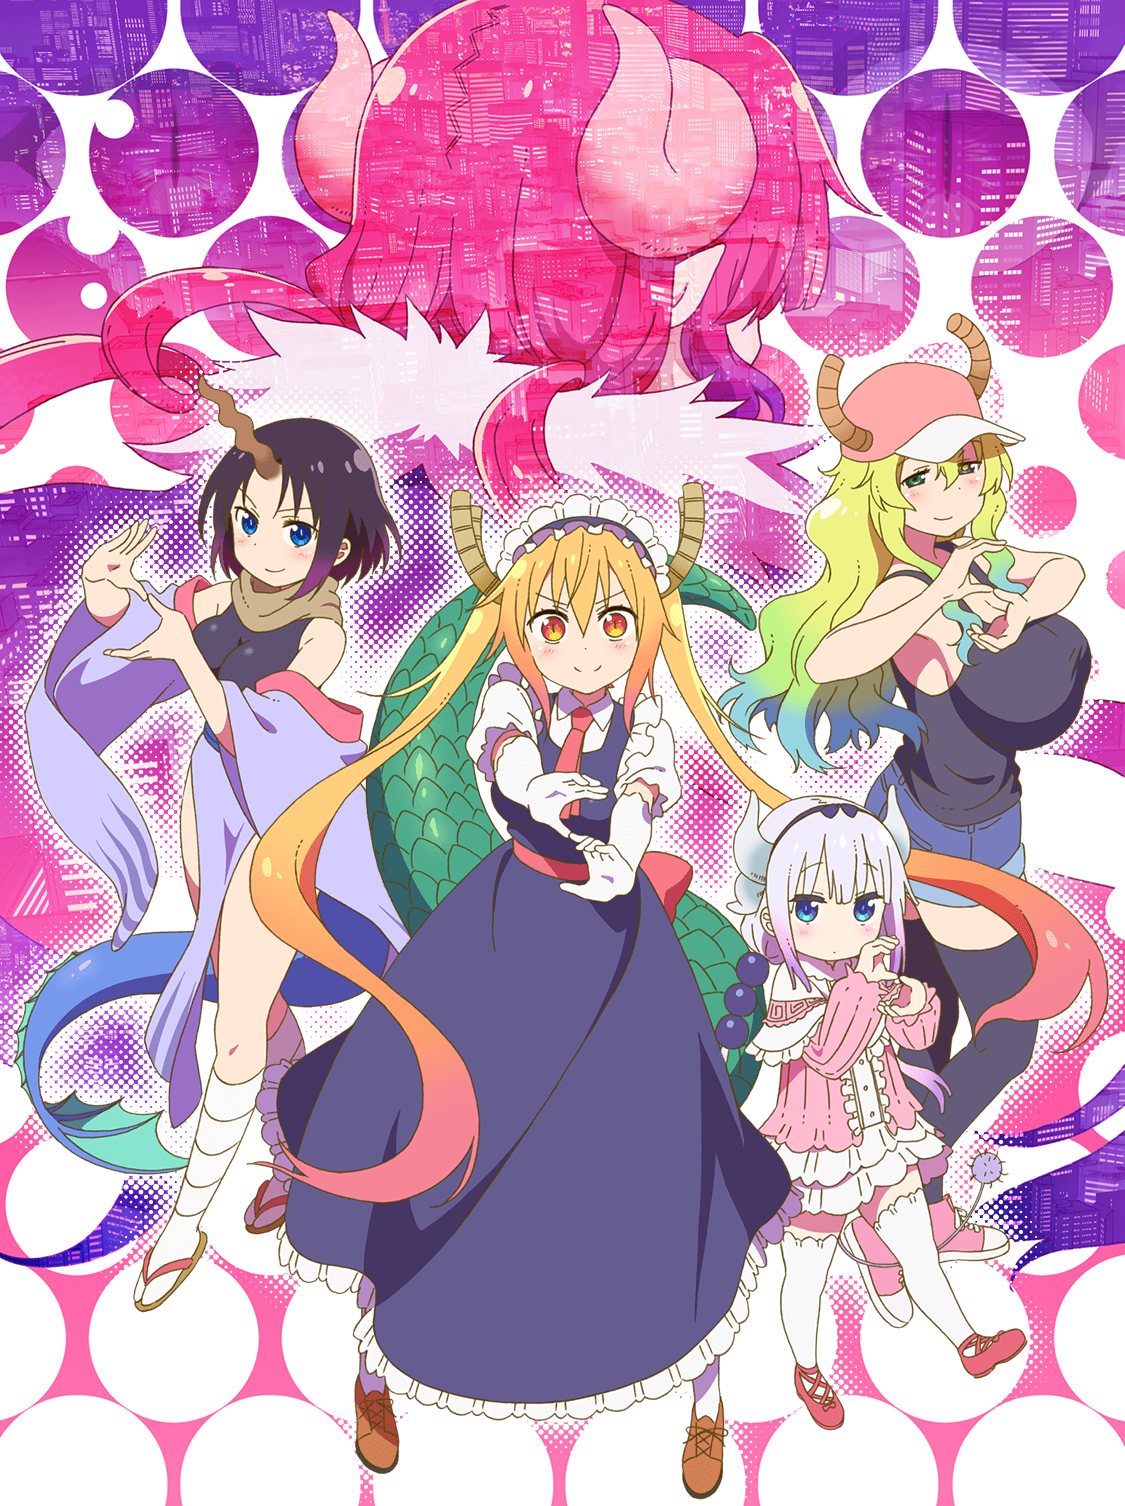 Magical Sempai TV Anime Slated to Air from July 2019